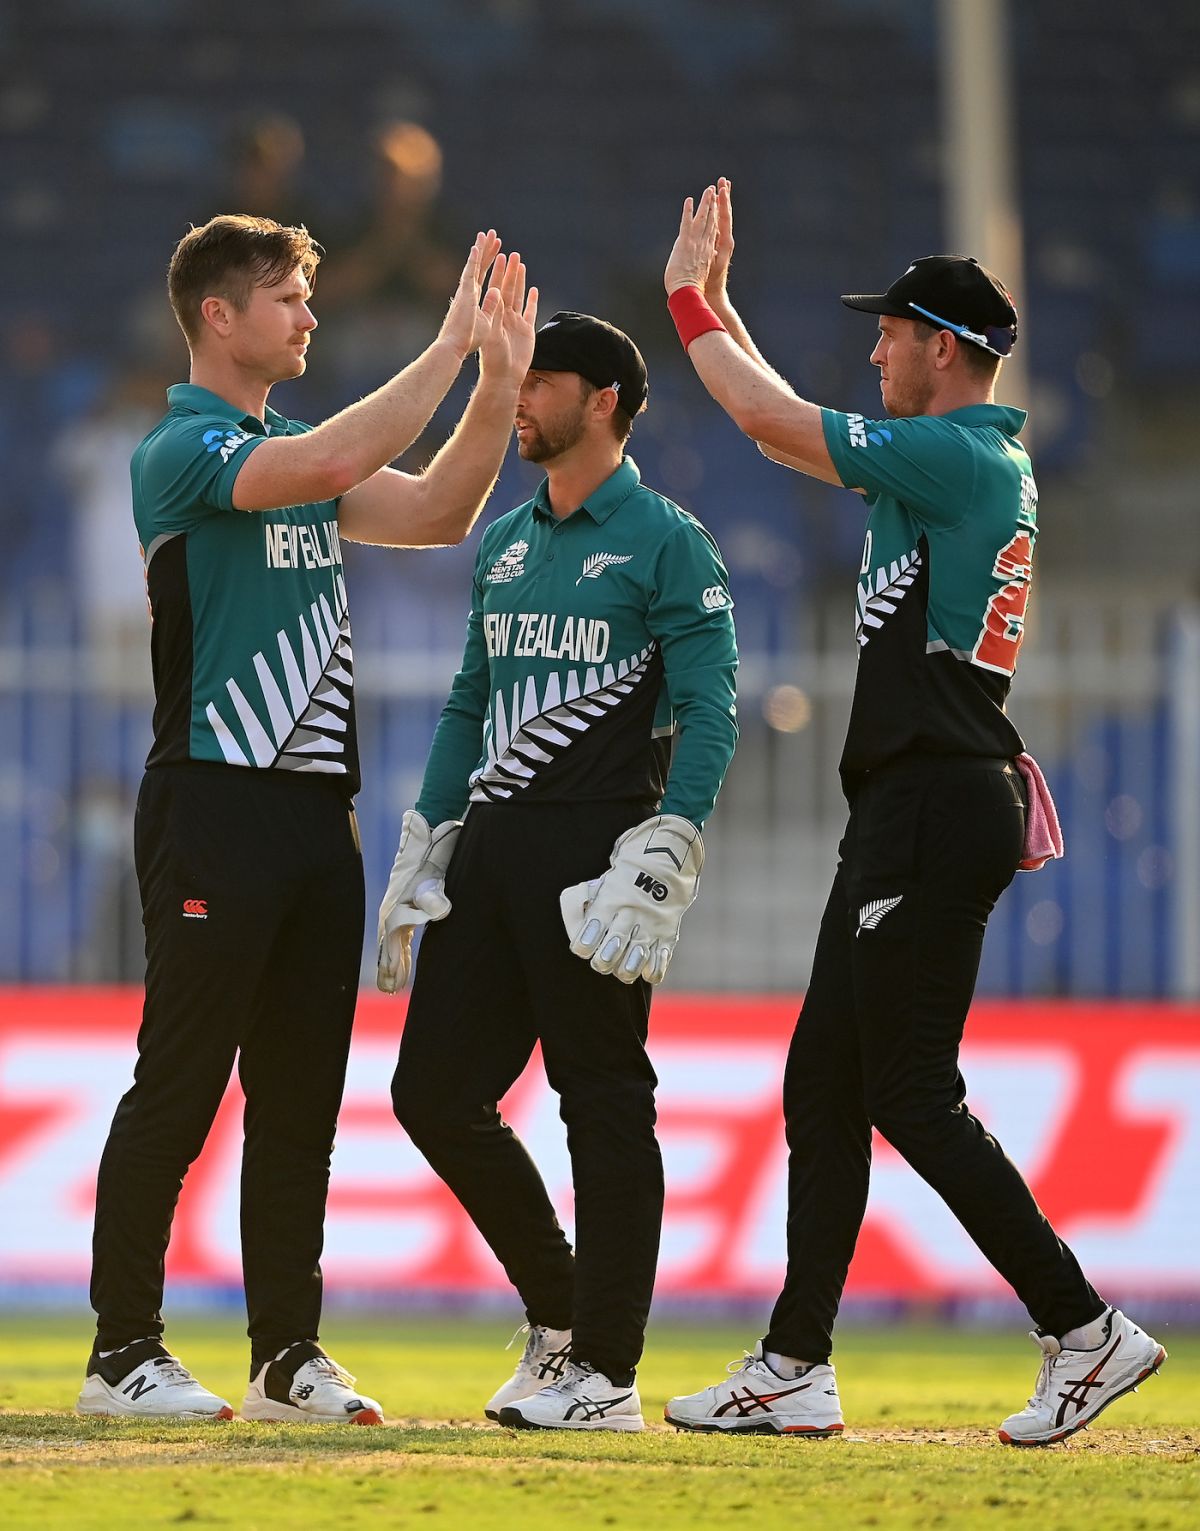 Jimmy Neesham picked up the first wicket for New Zealand, Namibia vs New Zealand, T20 World Cup, Group 2, Sharjah, November 5, 2021